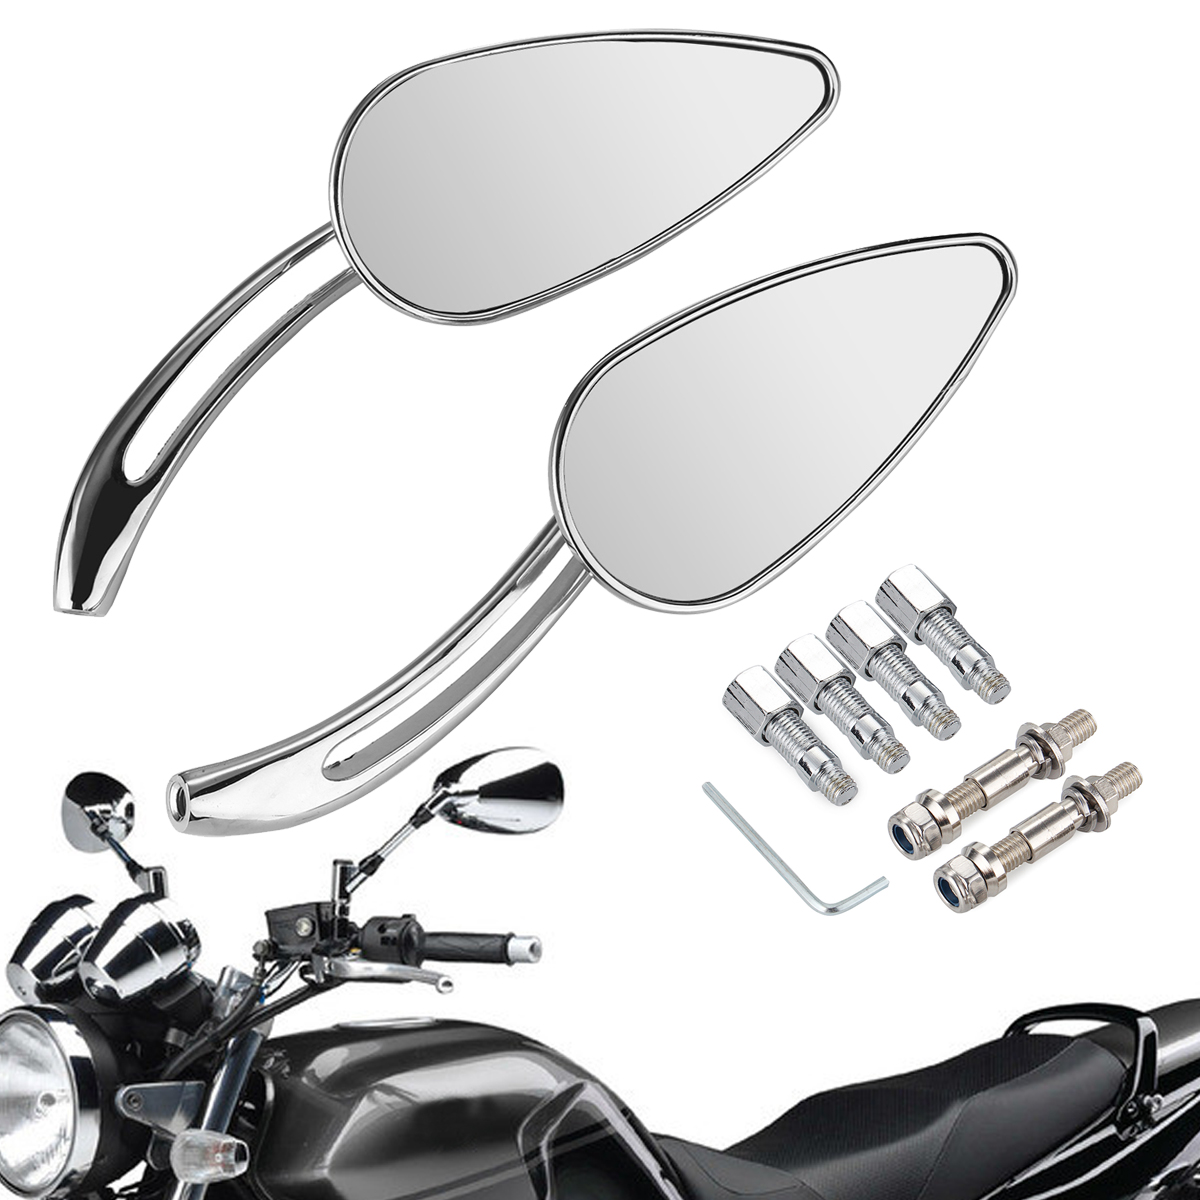 Chrome Skull Teardrop Rearview Mirrors For Harley Dyna Electra Glide Motorcycle 